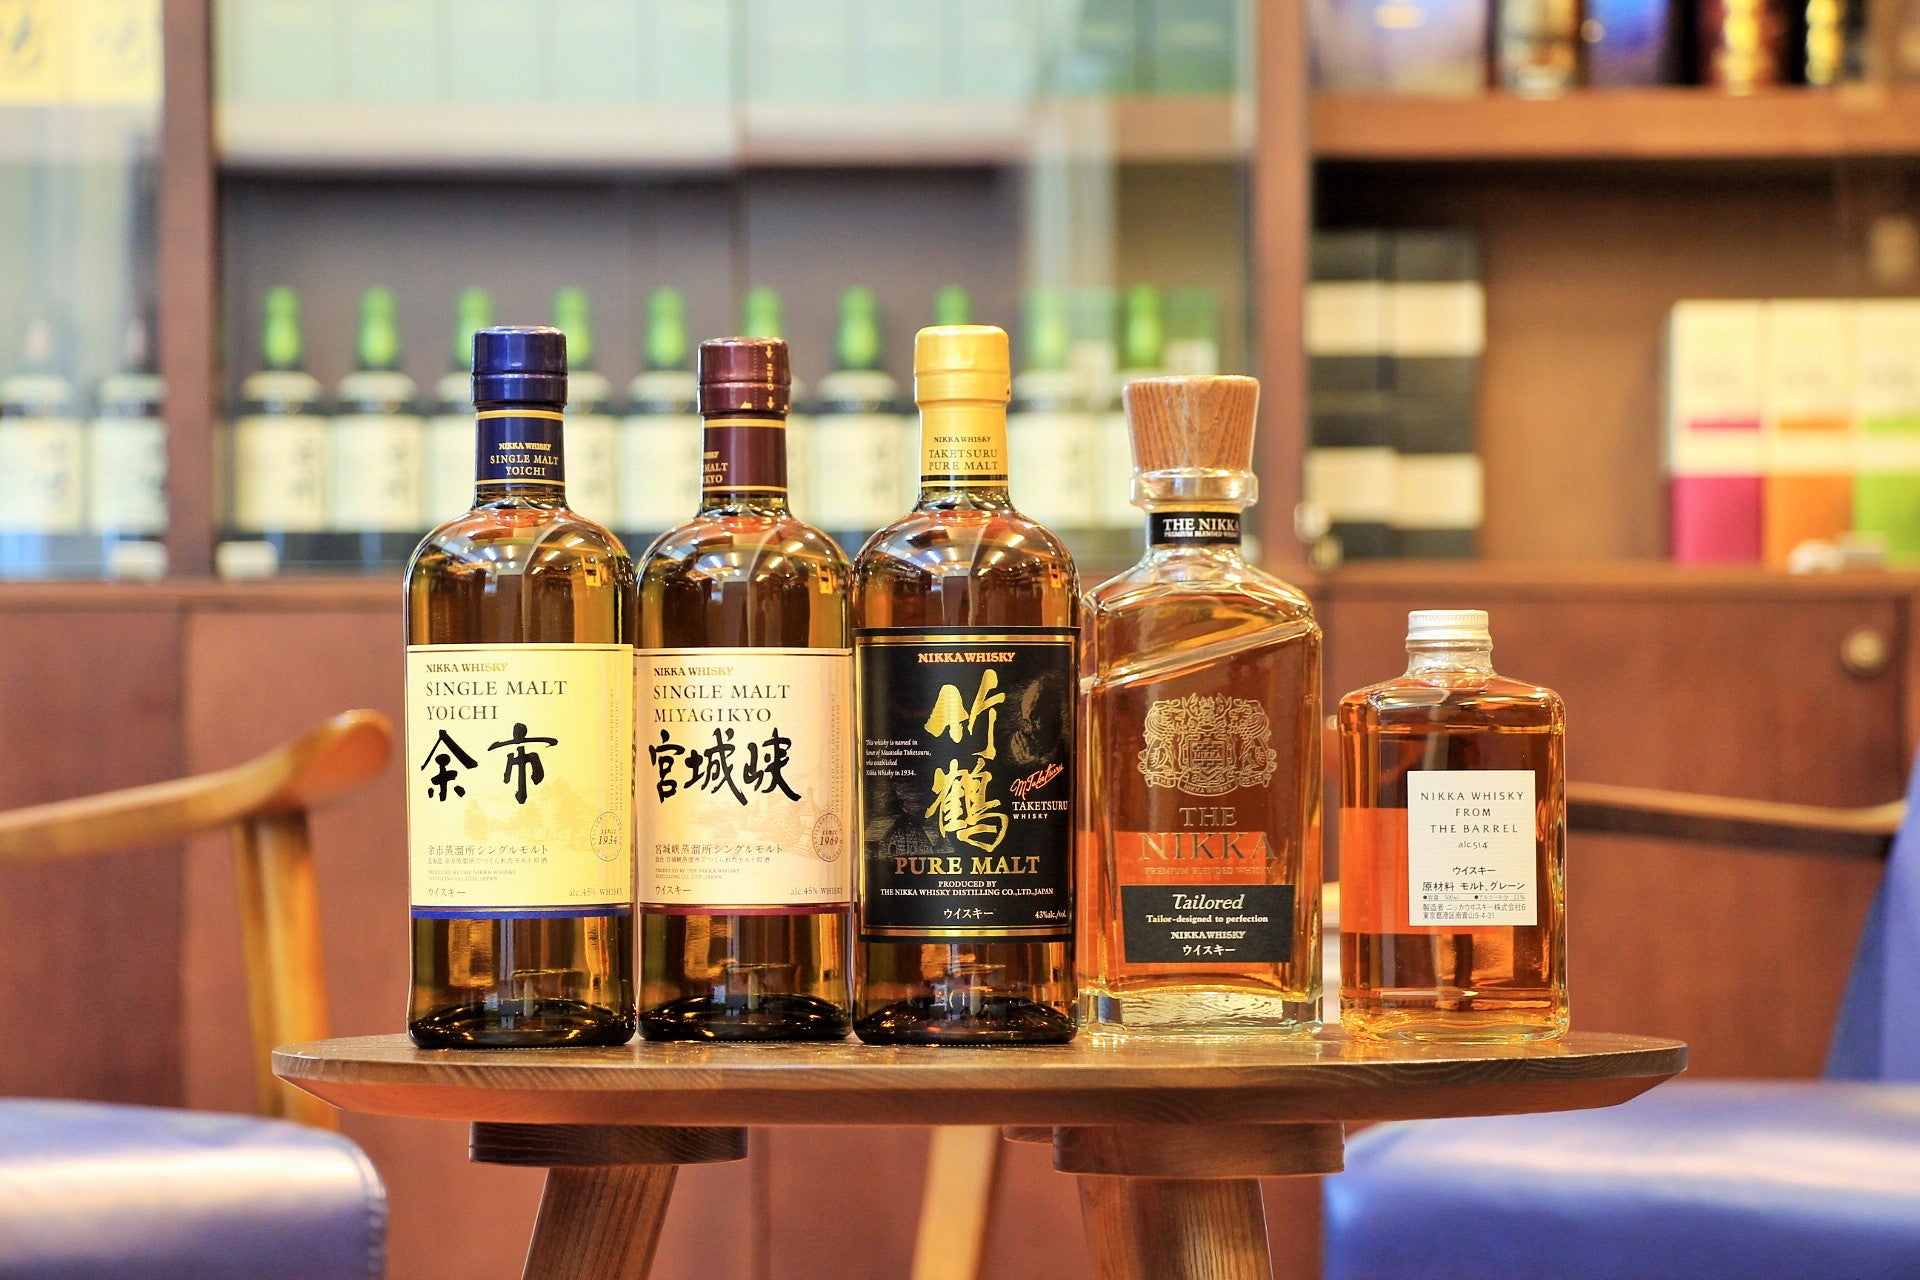 To Be or not To Be "Japanese Whisky"